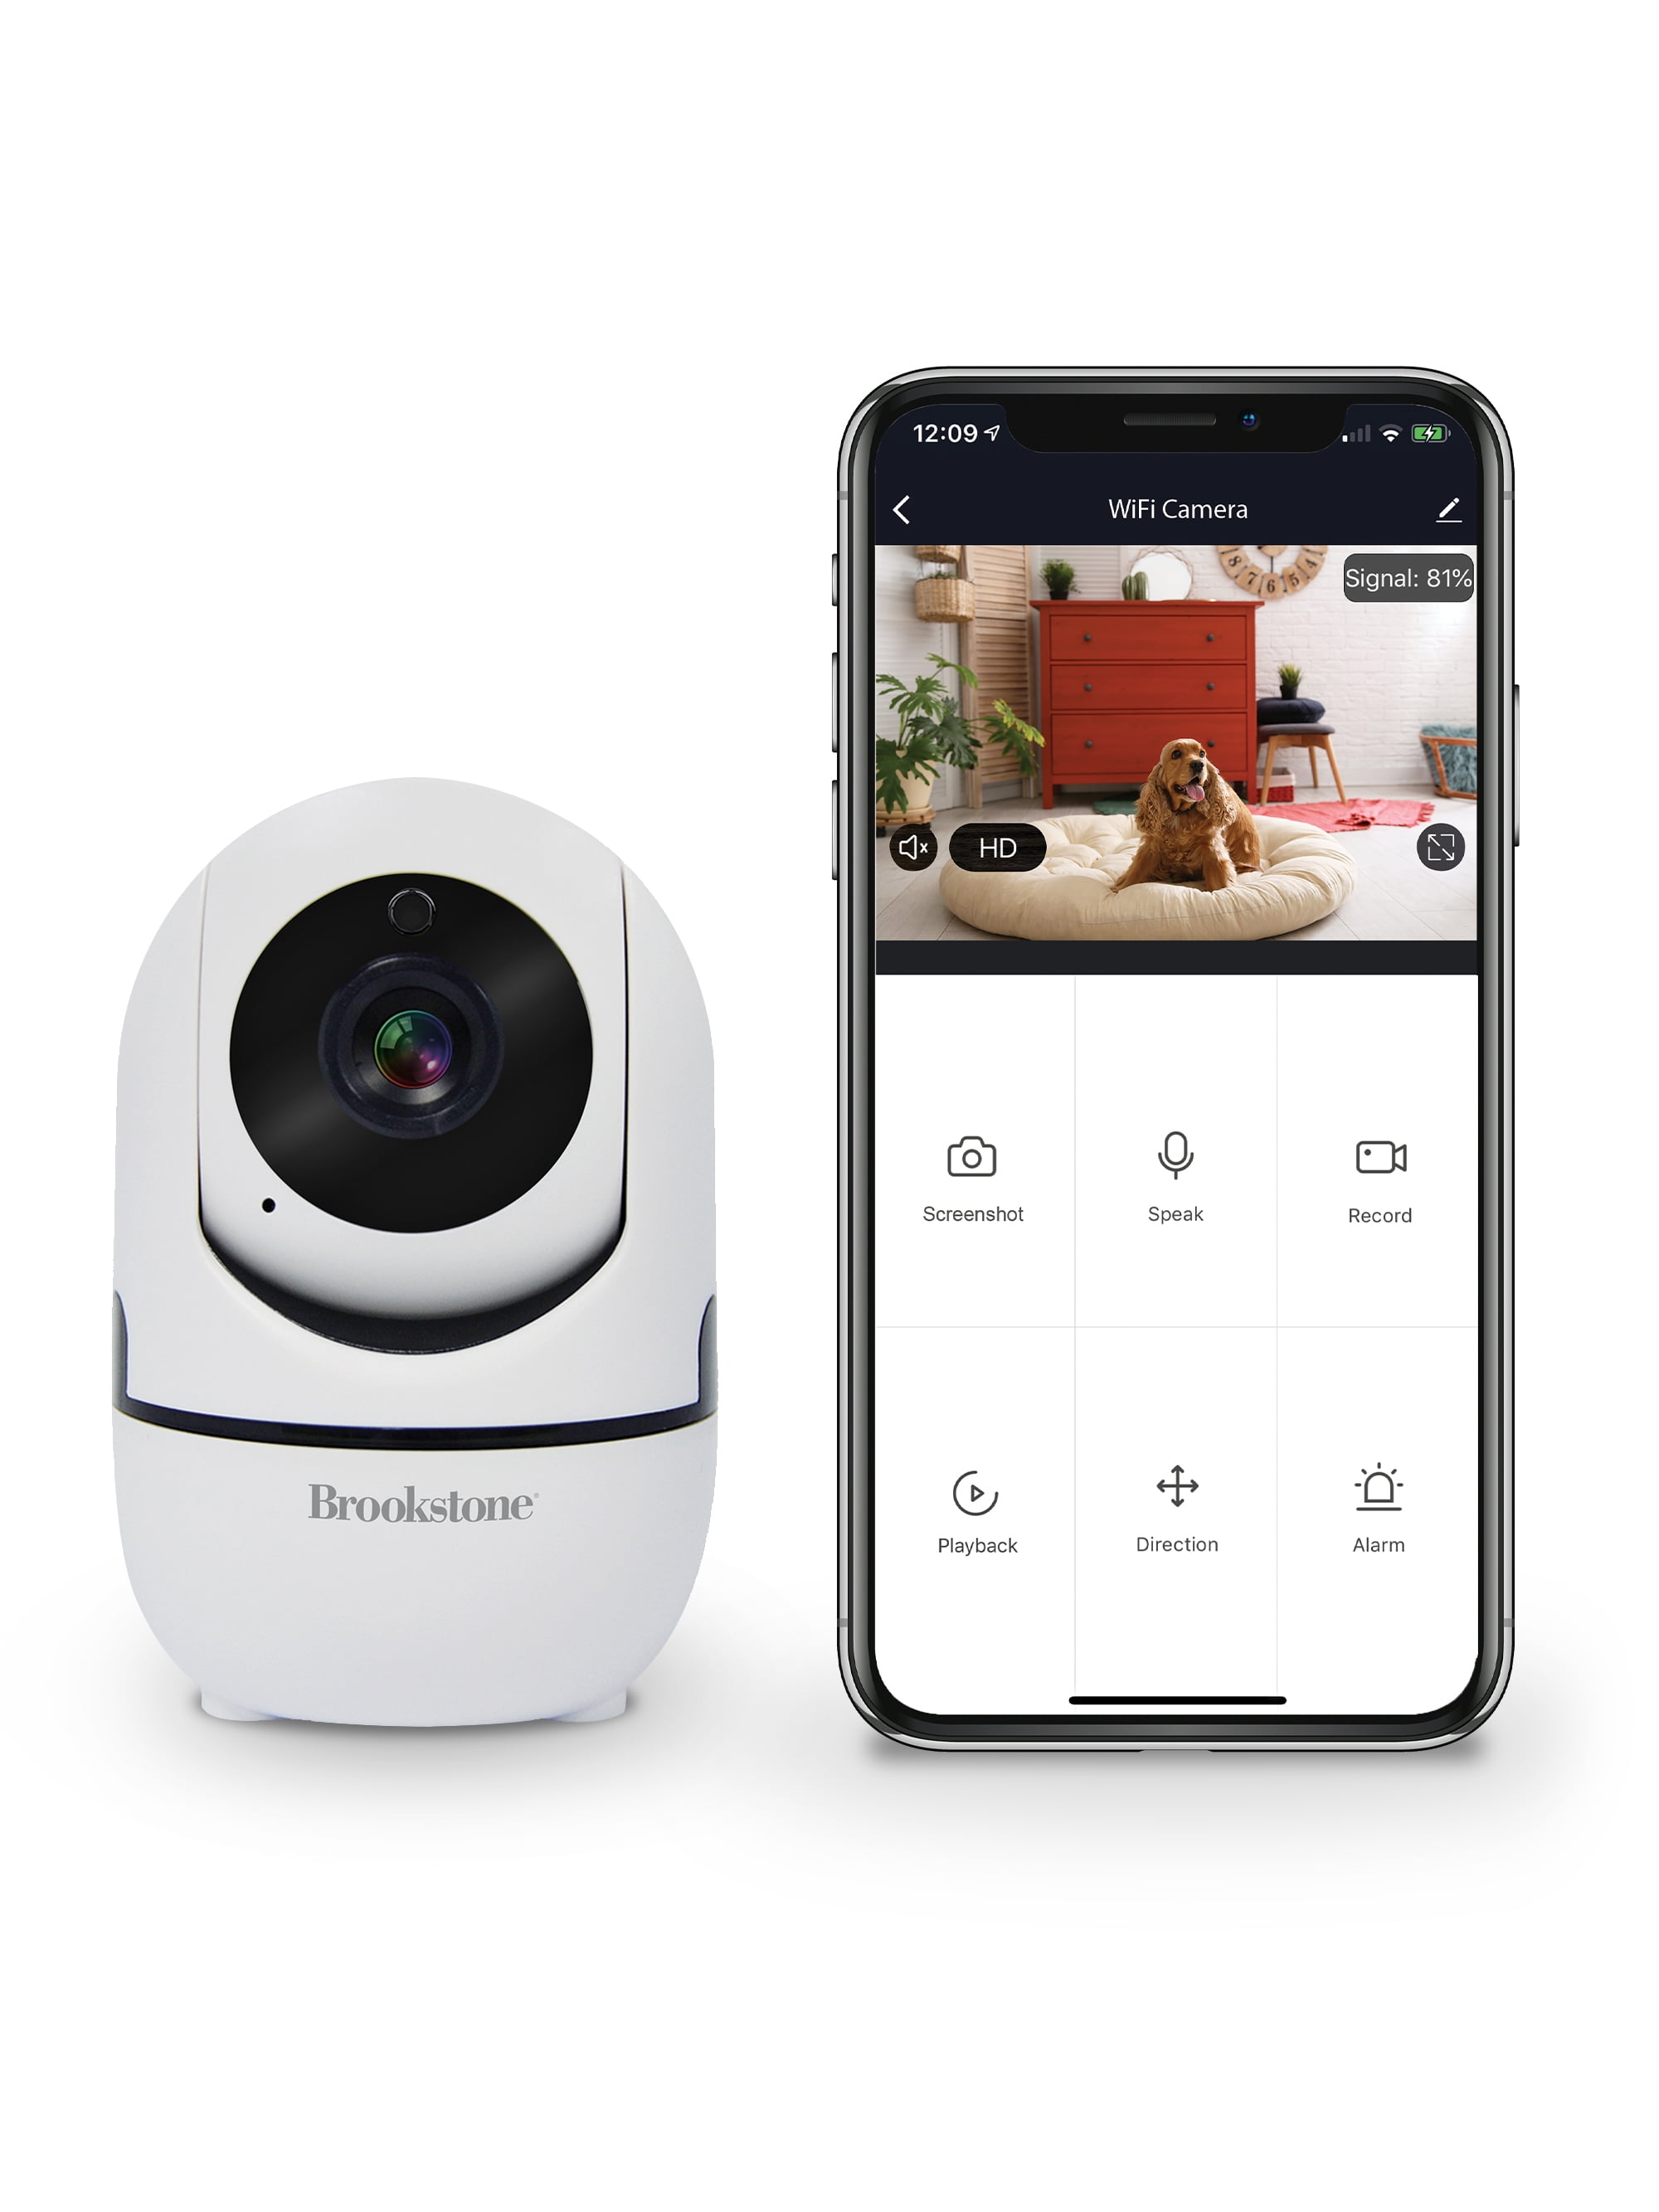 Brookstone Indoor WIFI Security/Surveillance/Nanny/Pet Camera with Pan Tilt Controls, Night Vision, Motion Detection, Two-Way Audio and Smart Tracking with USB Connecting Cable and USB adapter - Walmart.com